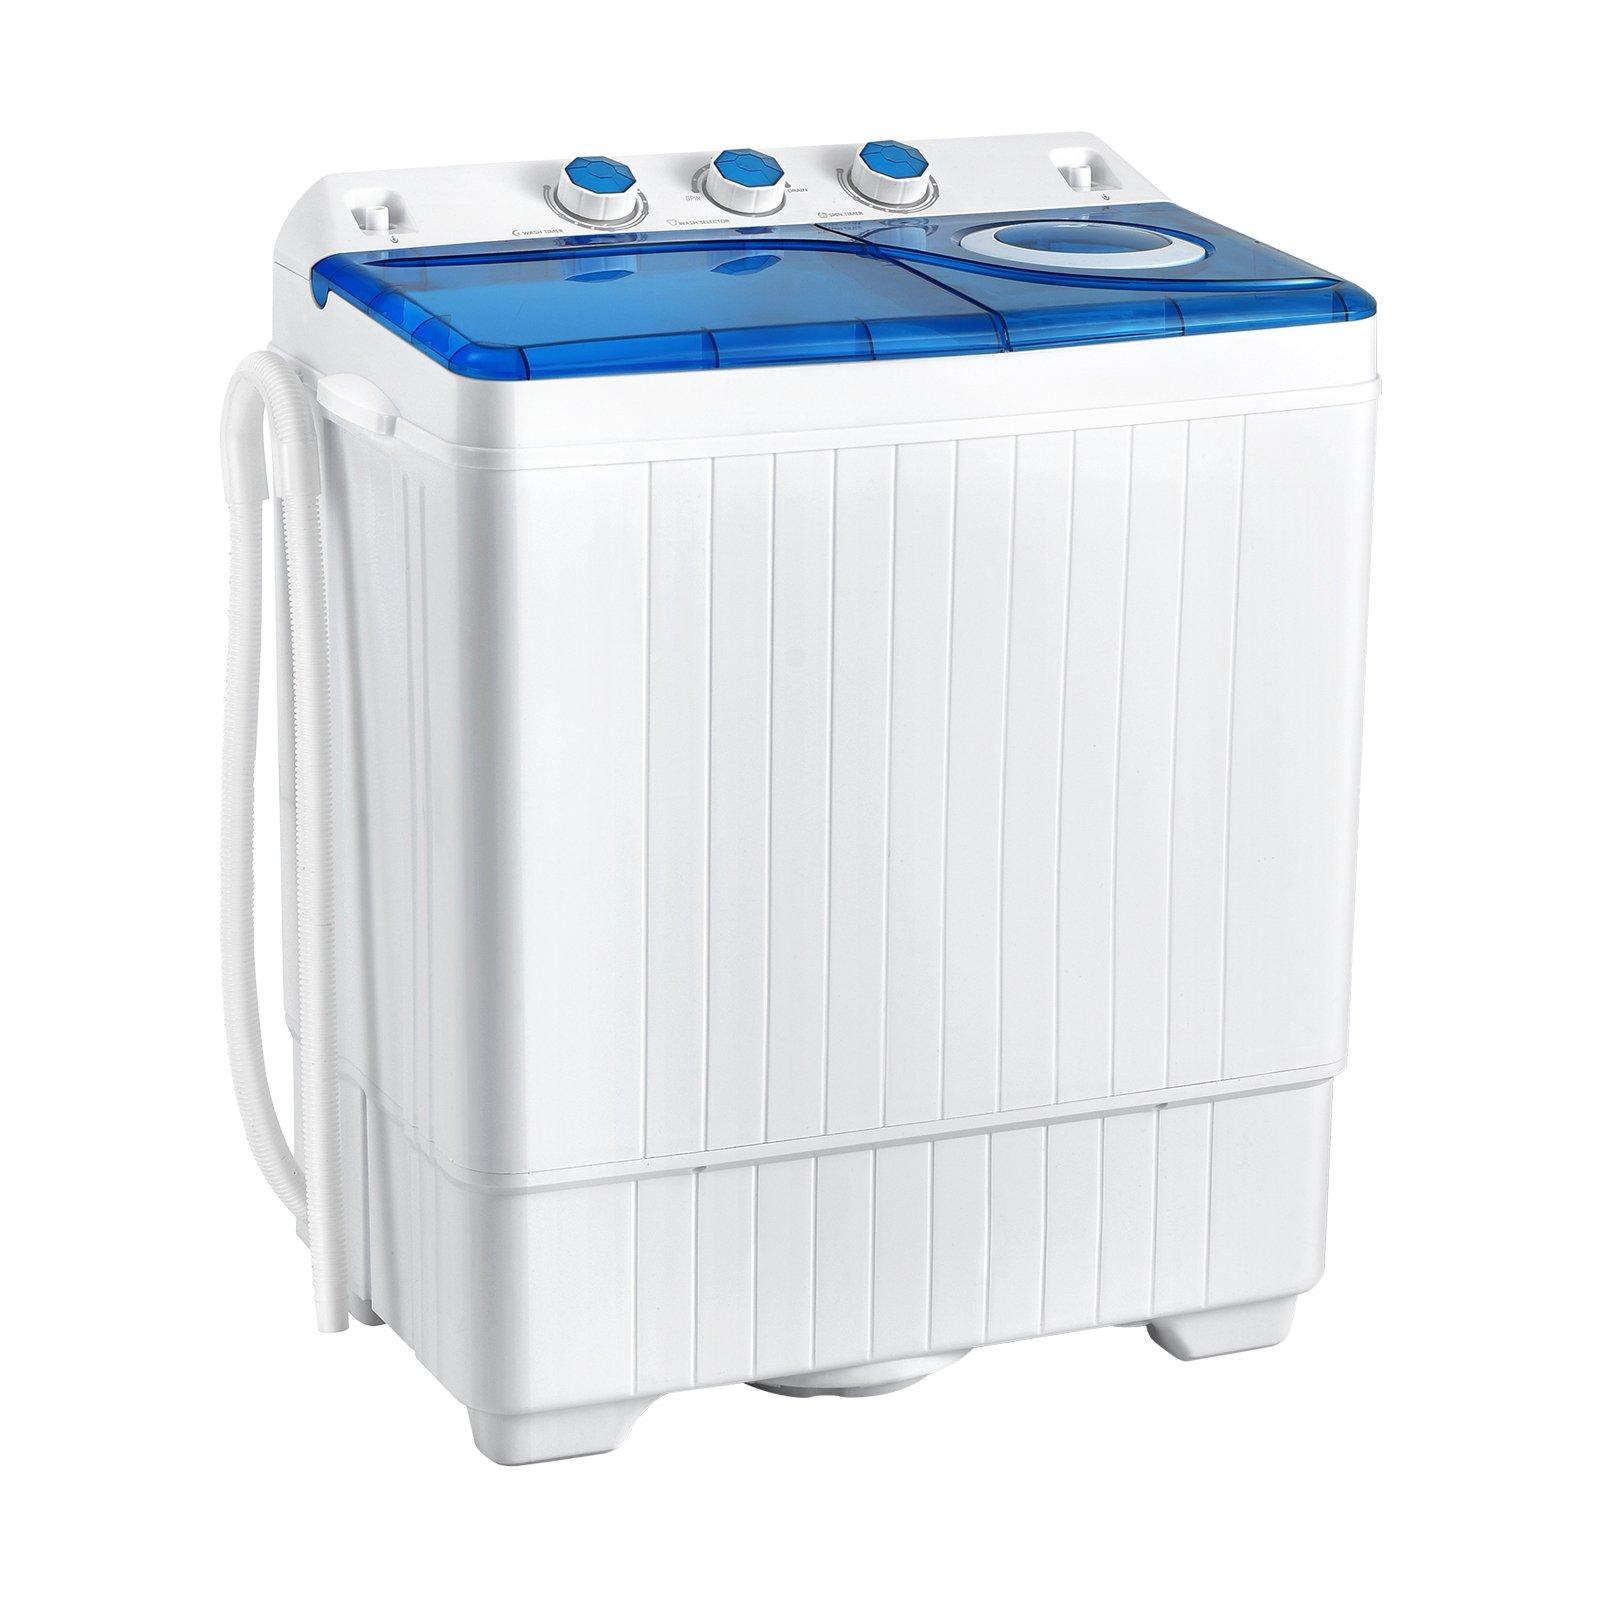 Portable Washing Machine Twin Tub Washer and Spin Dryer Semi-automatic Laundry Washer